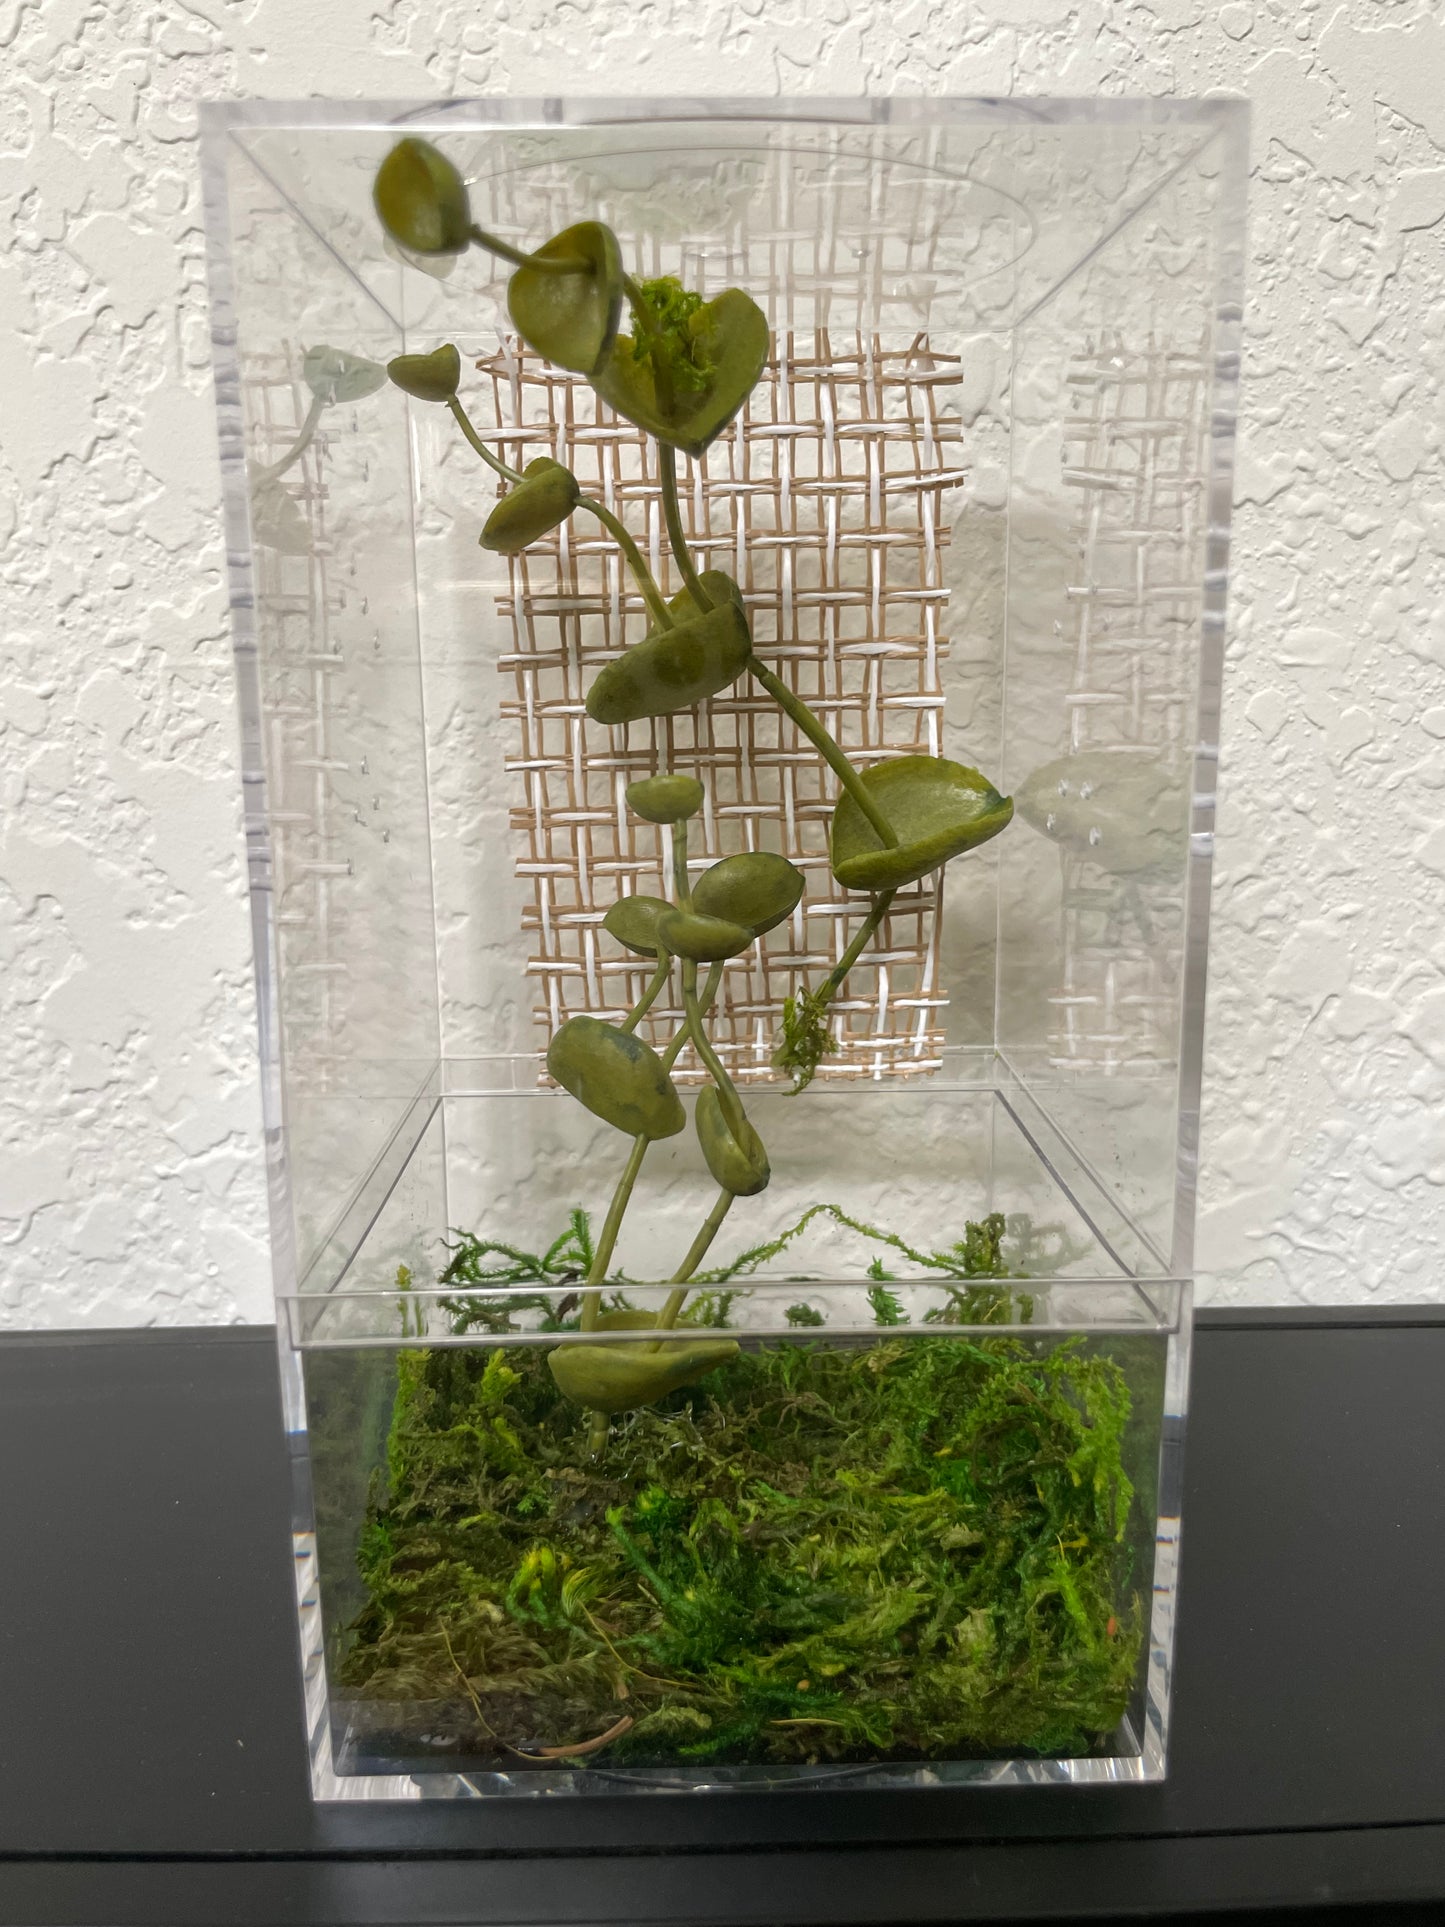 Spider Enclosure with Plastic Green Plant